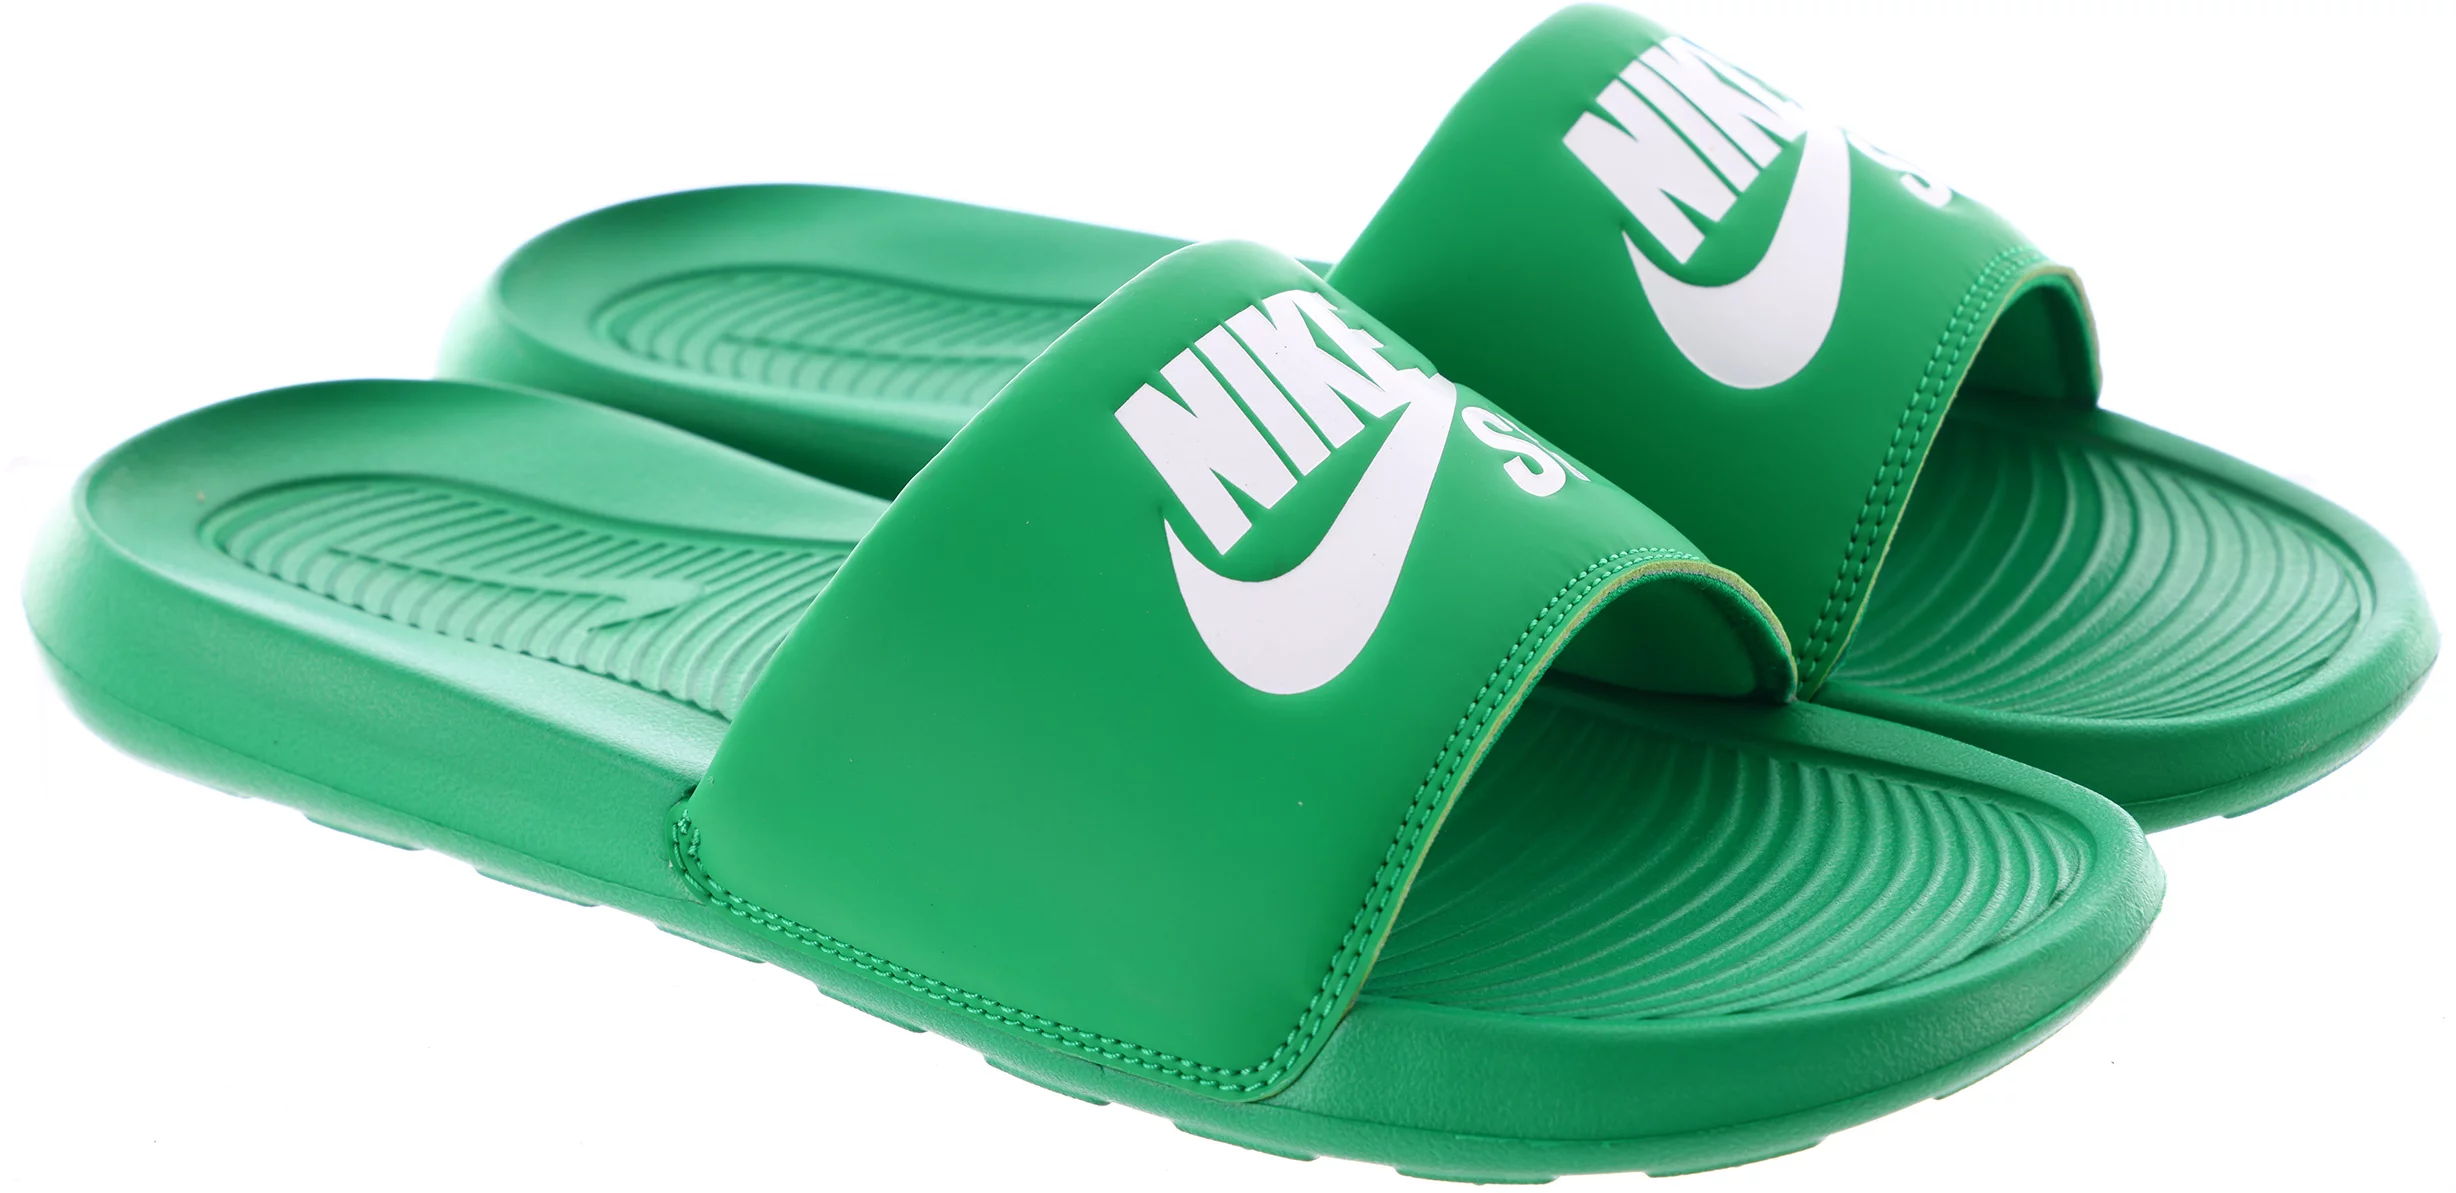 Victori One Slide Sandals - lucky green/white-lucky green | Tactics